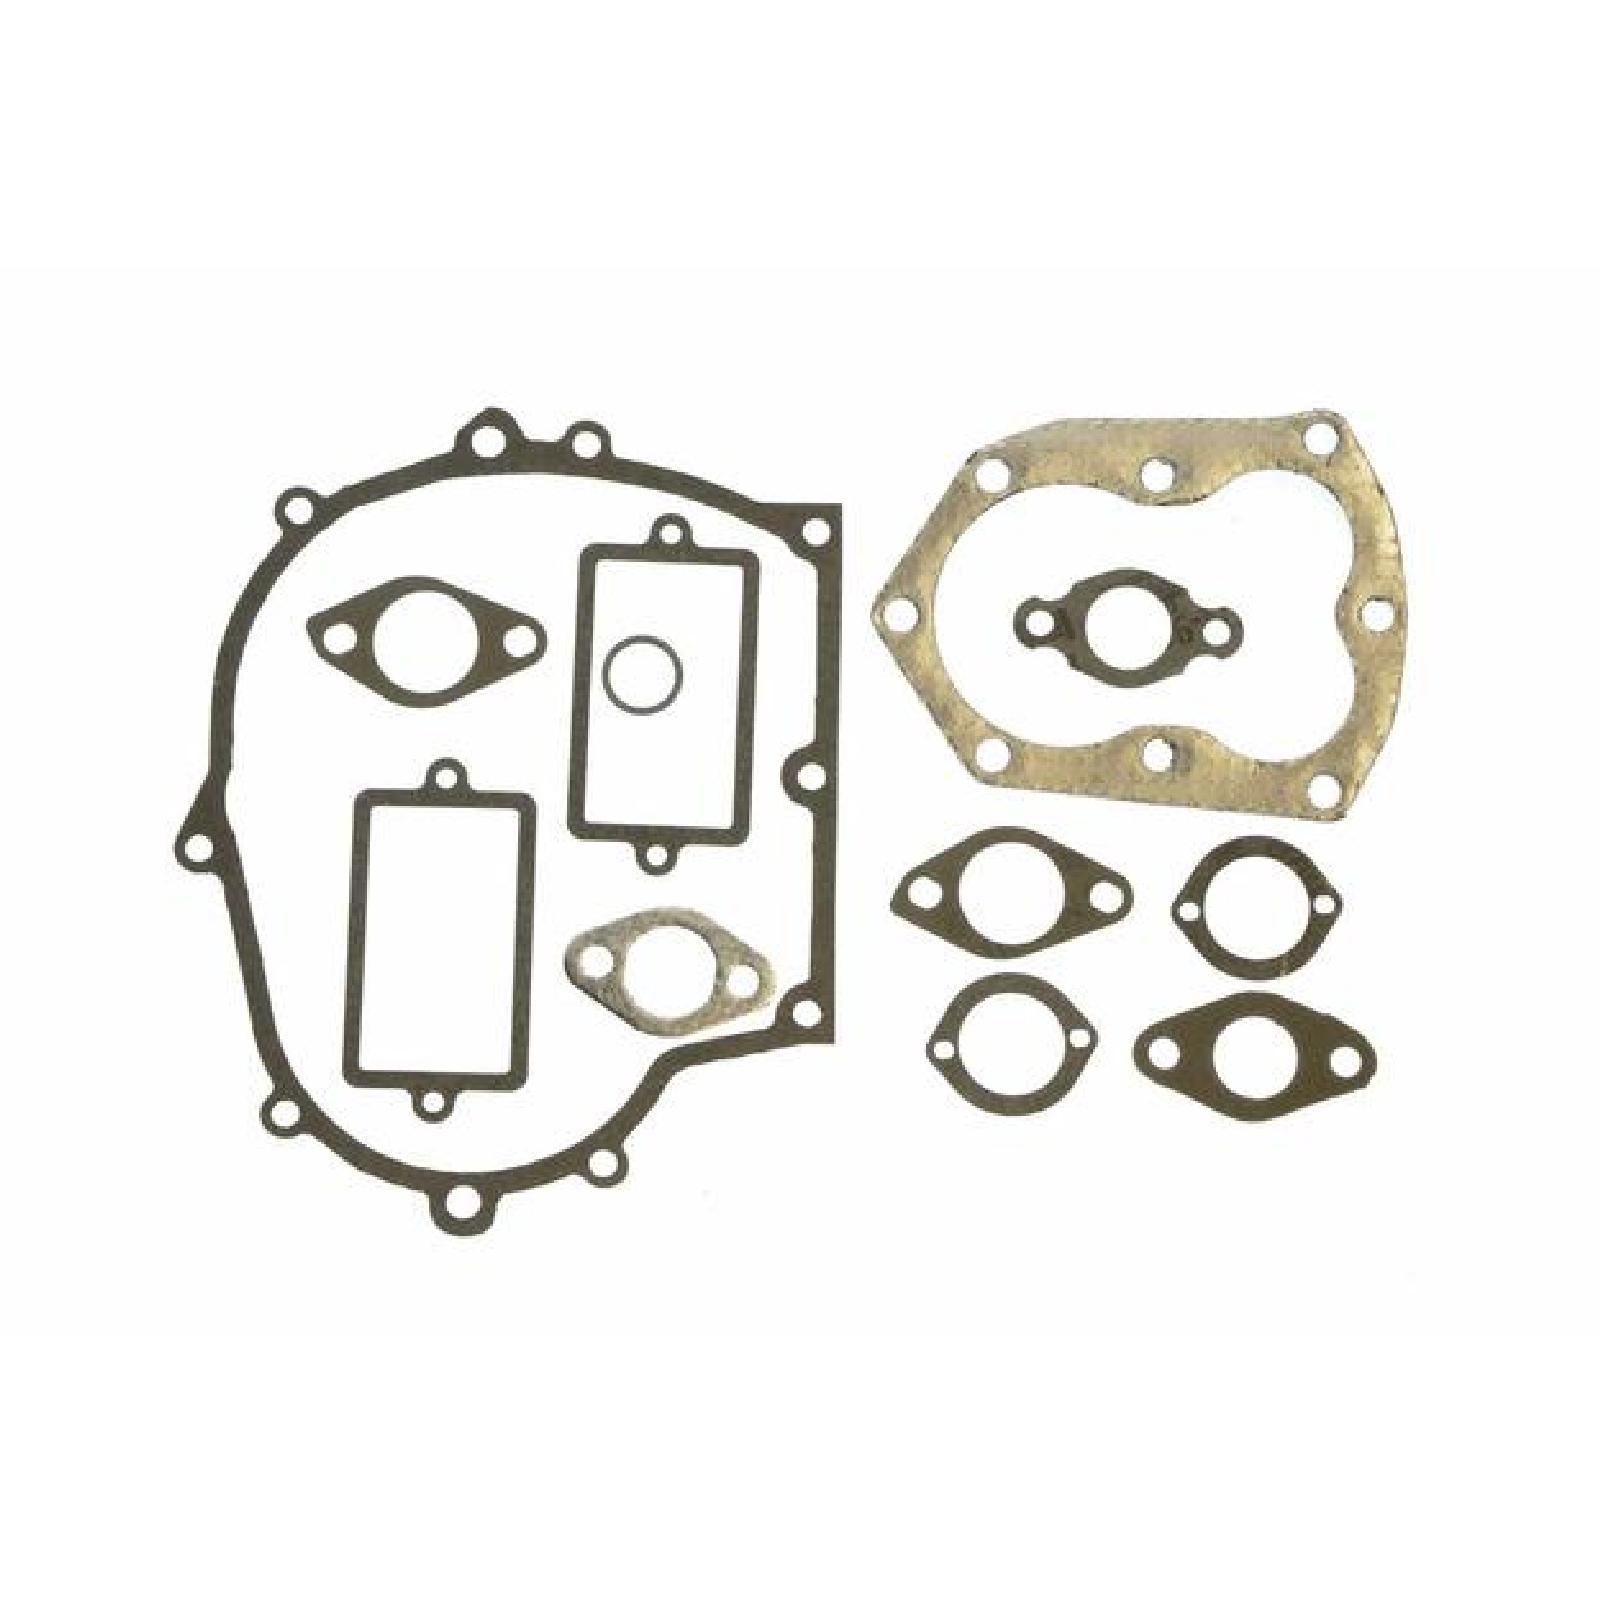 GASKET SET part# 33239 by Tecumseh - Click Image to Close